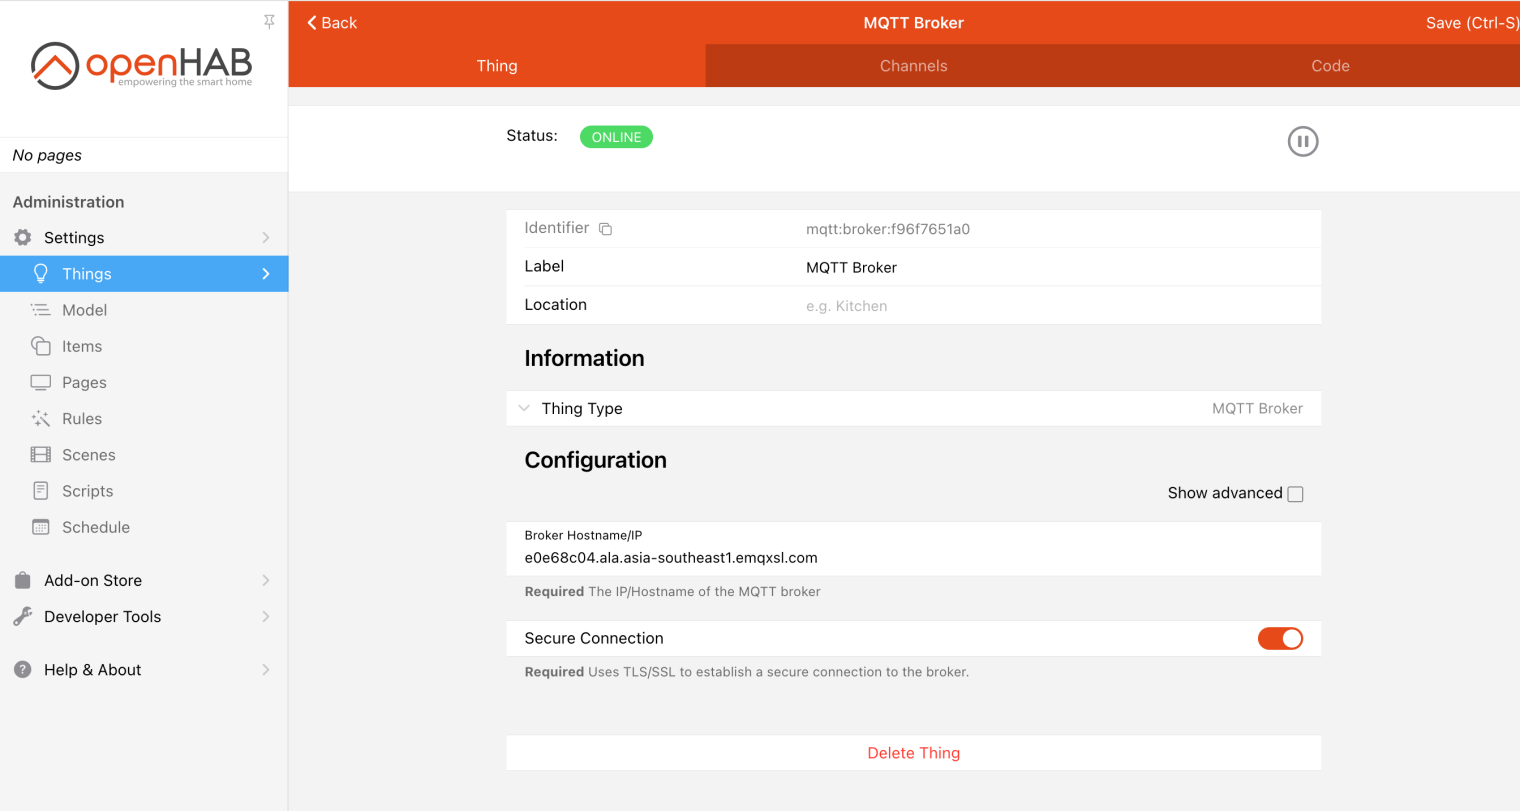 MQTT Broker successfully linked with openHAB